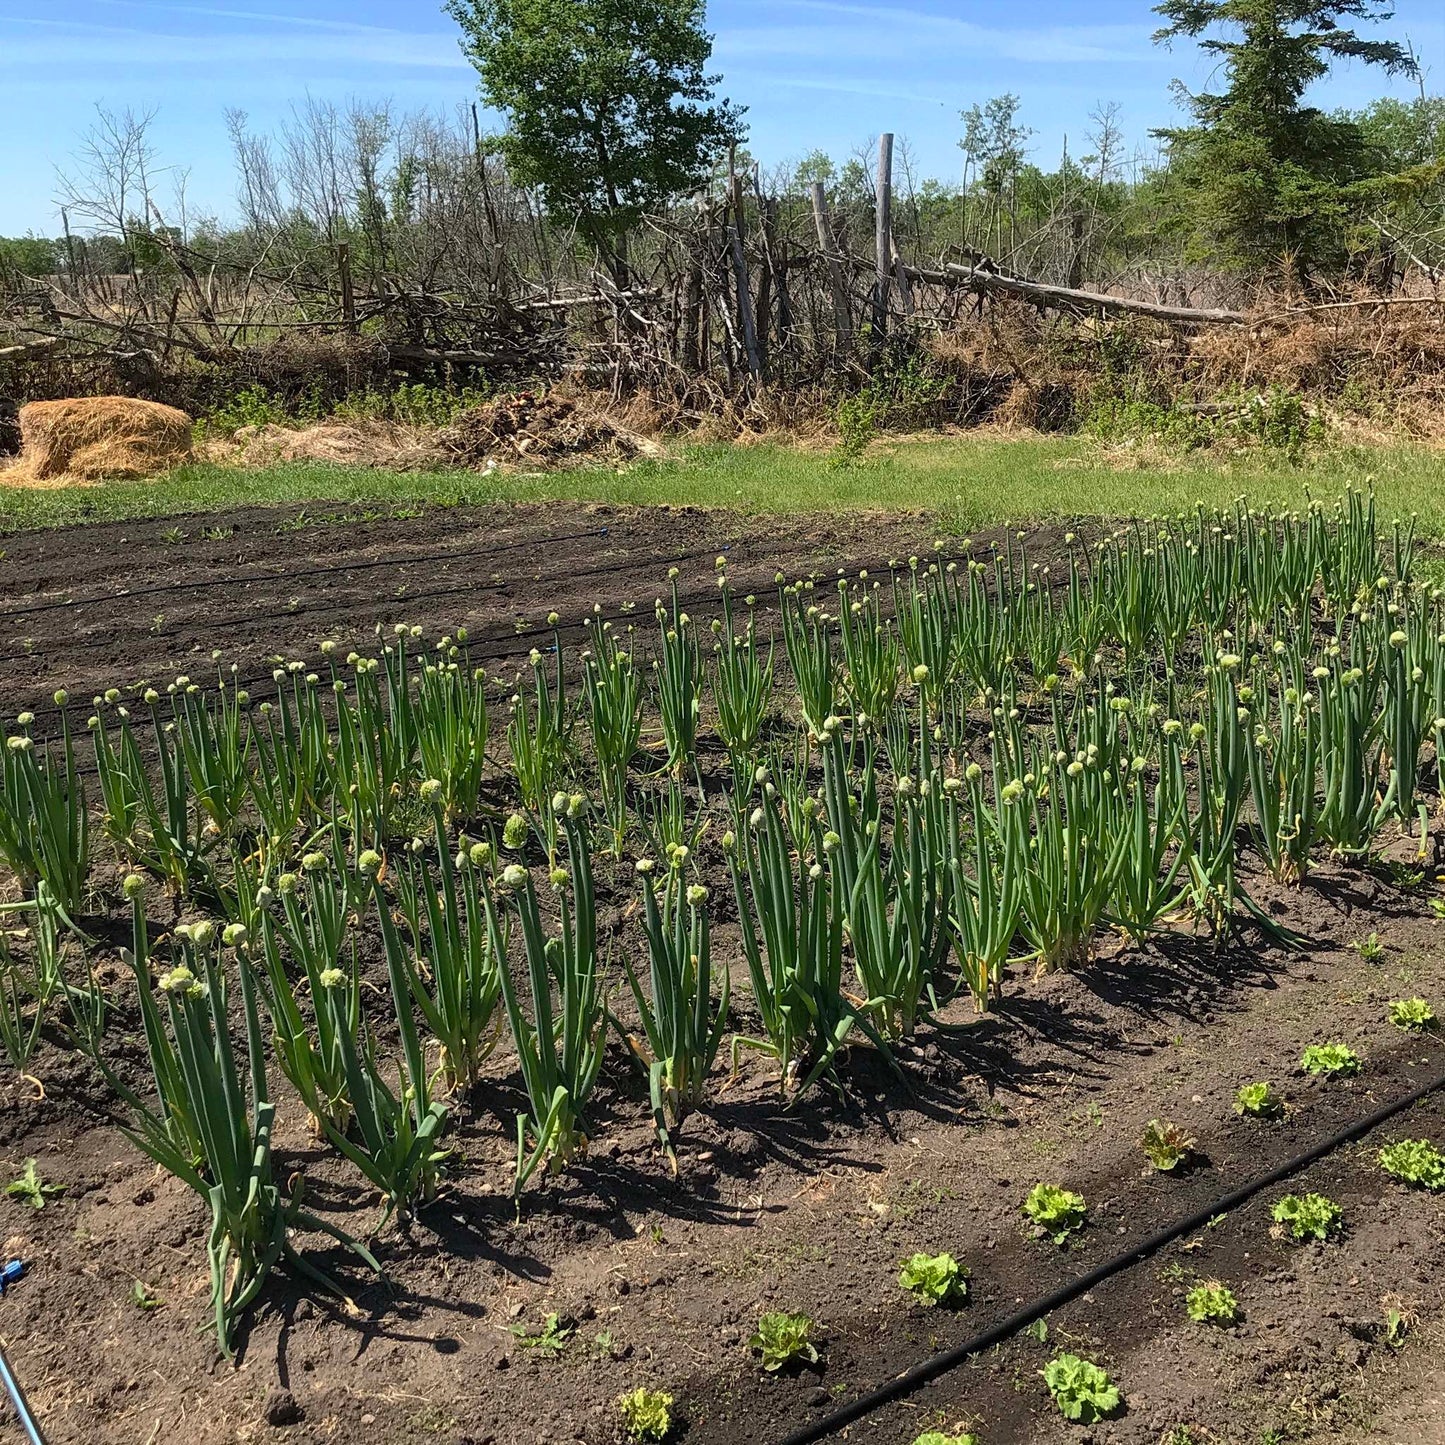 Rows of scallions in the springtime with flowers about to open.